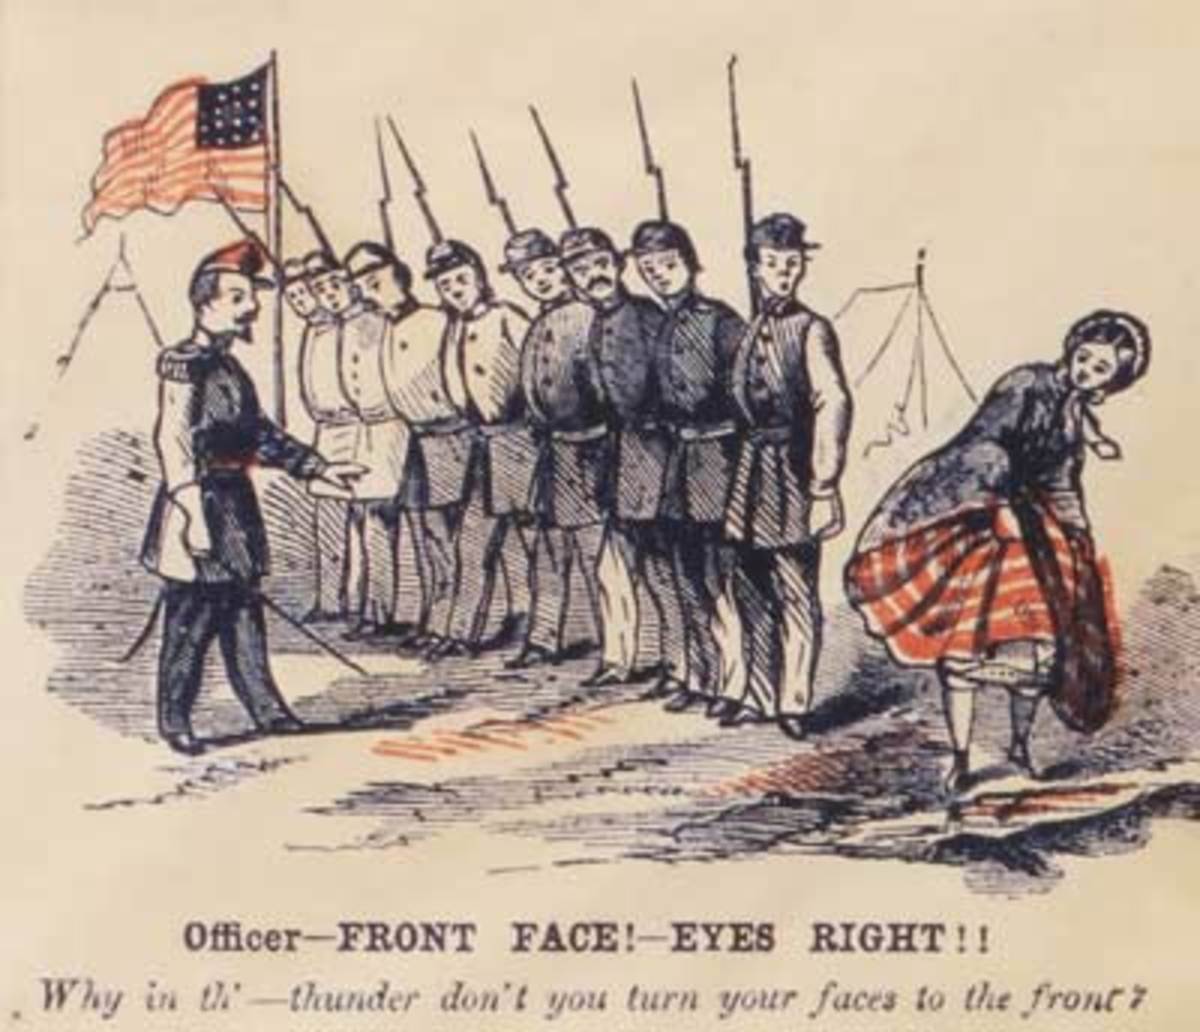 A whimsical cartoon of troops and a lady in a rather fetching (for the 19th century) pose